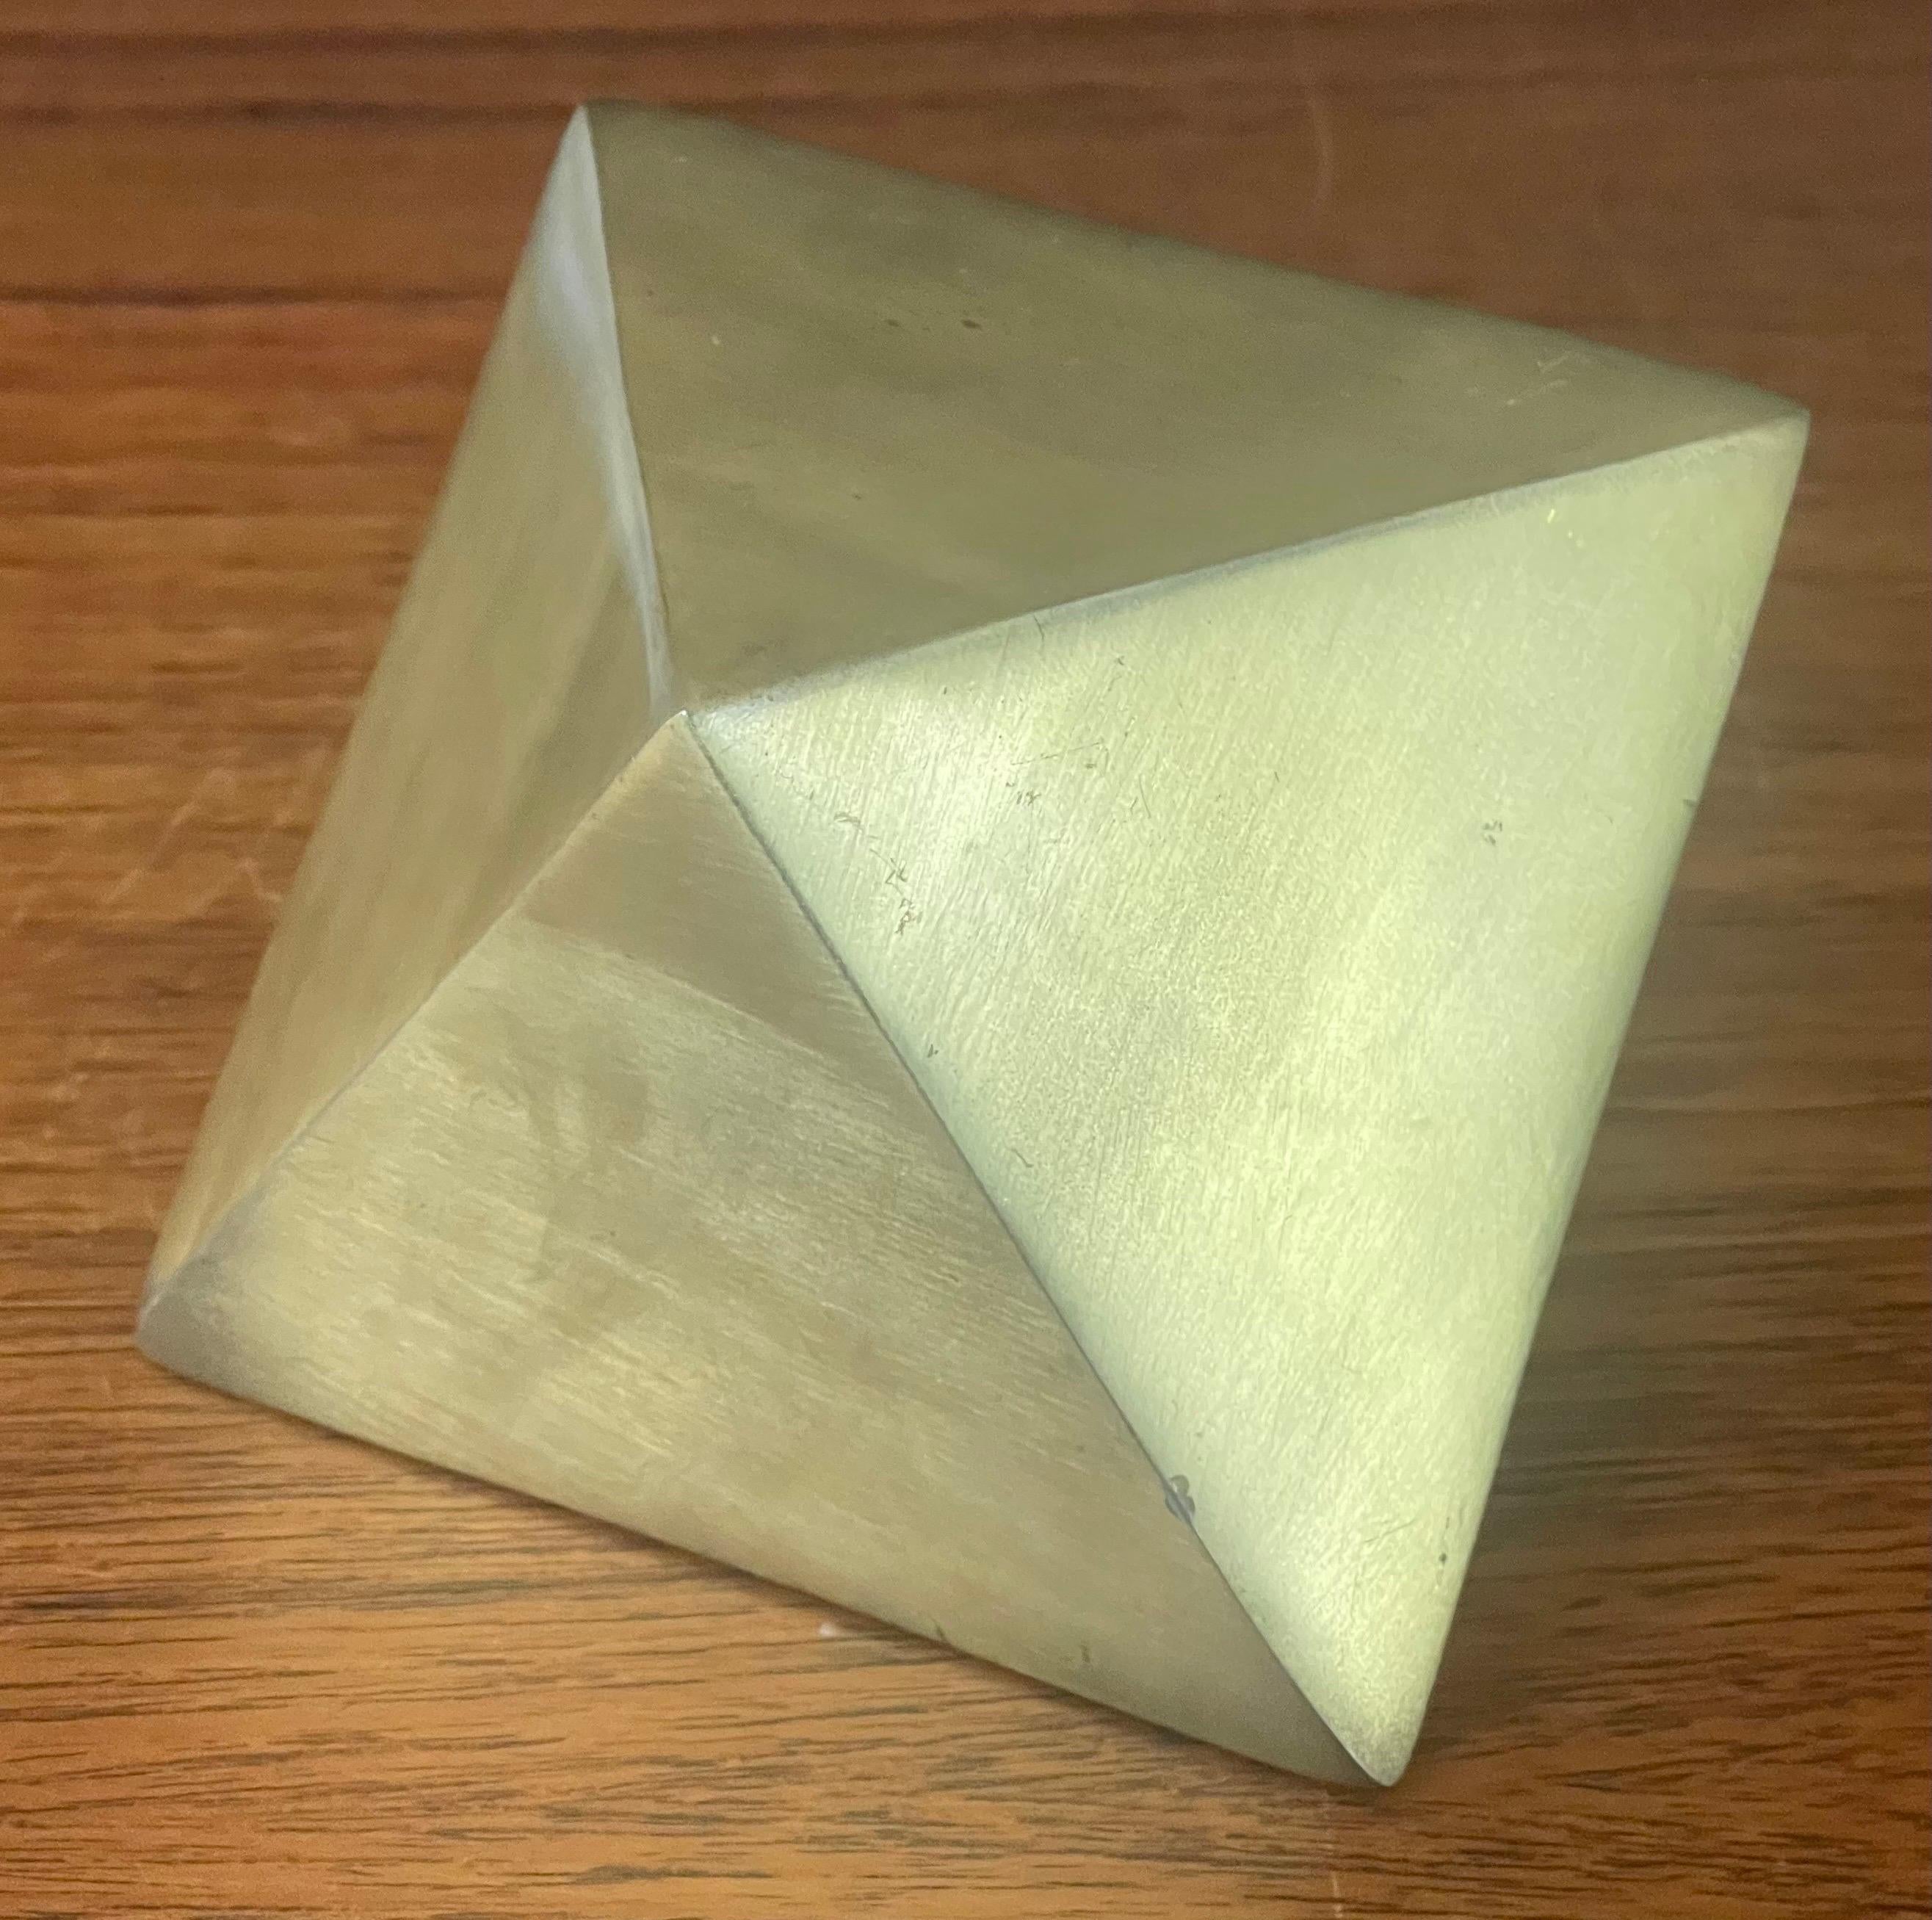 Vintage diamond shaped brass paperweight, circa 1960s. The piece has a well worn brass patina and measures 4.25